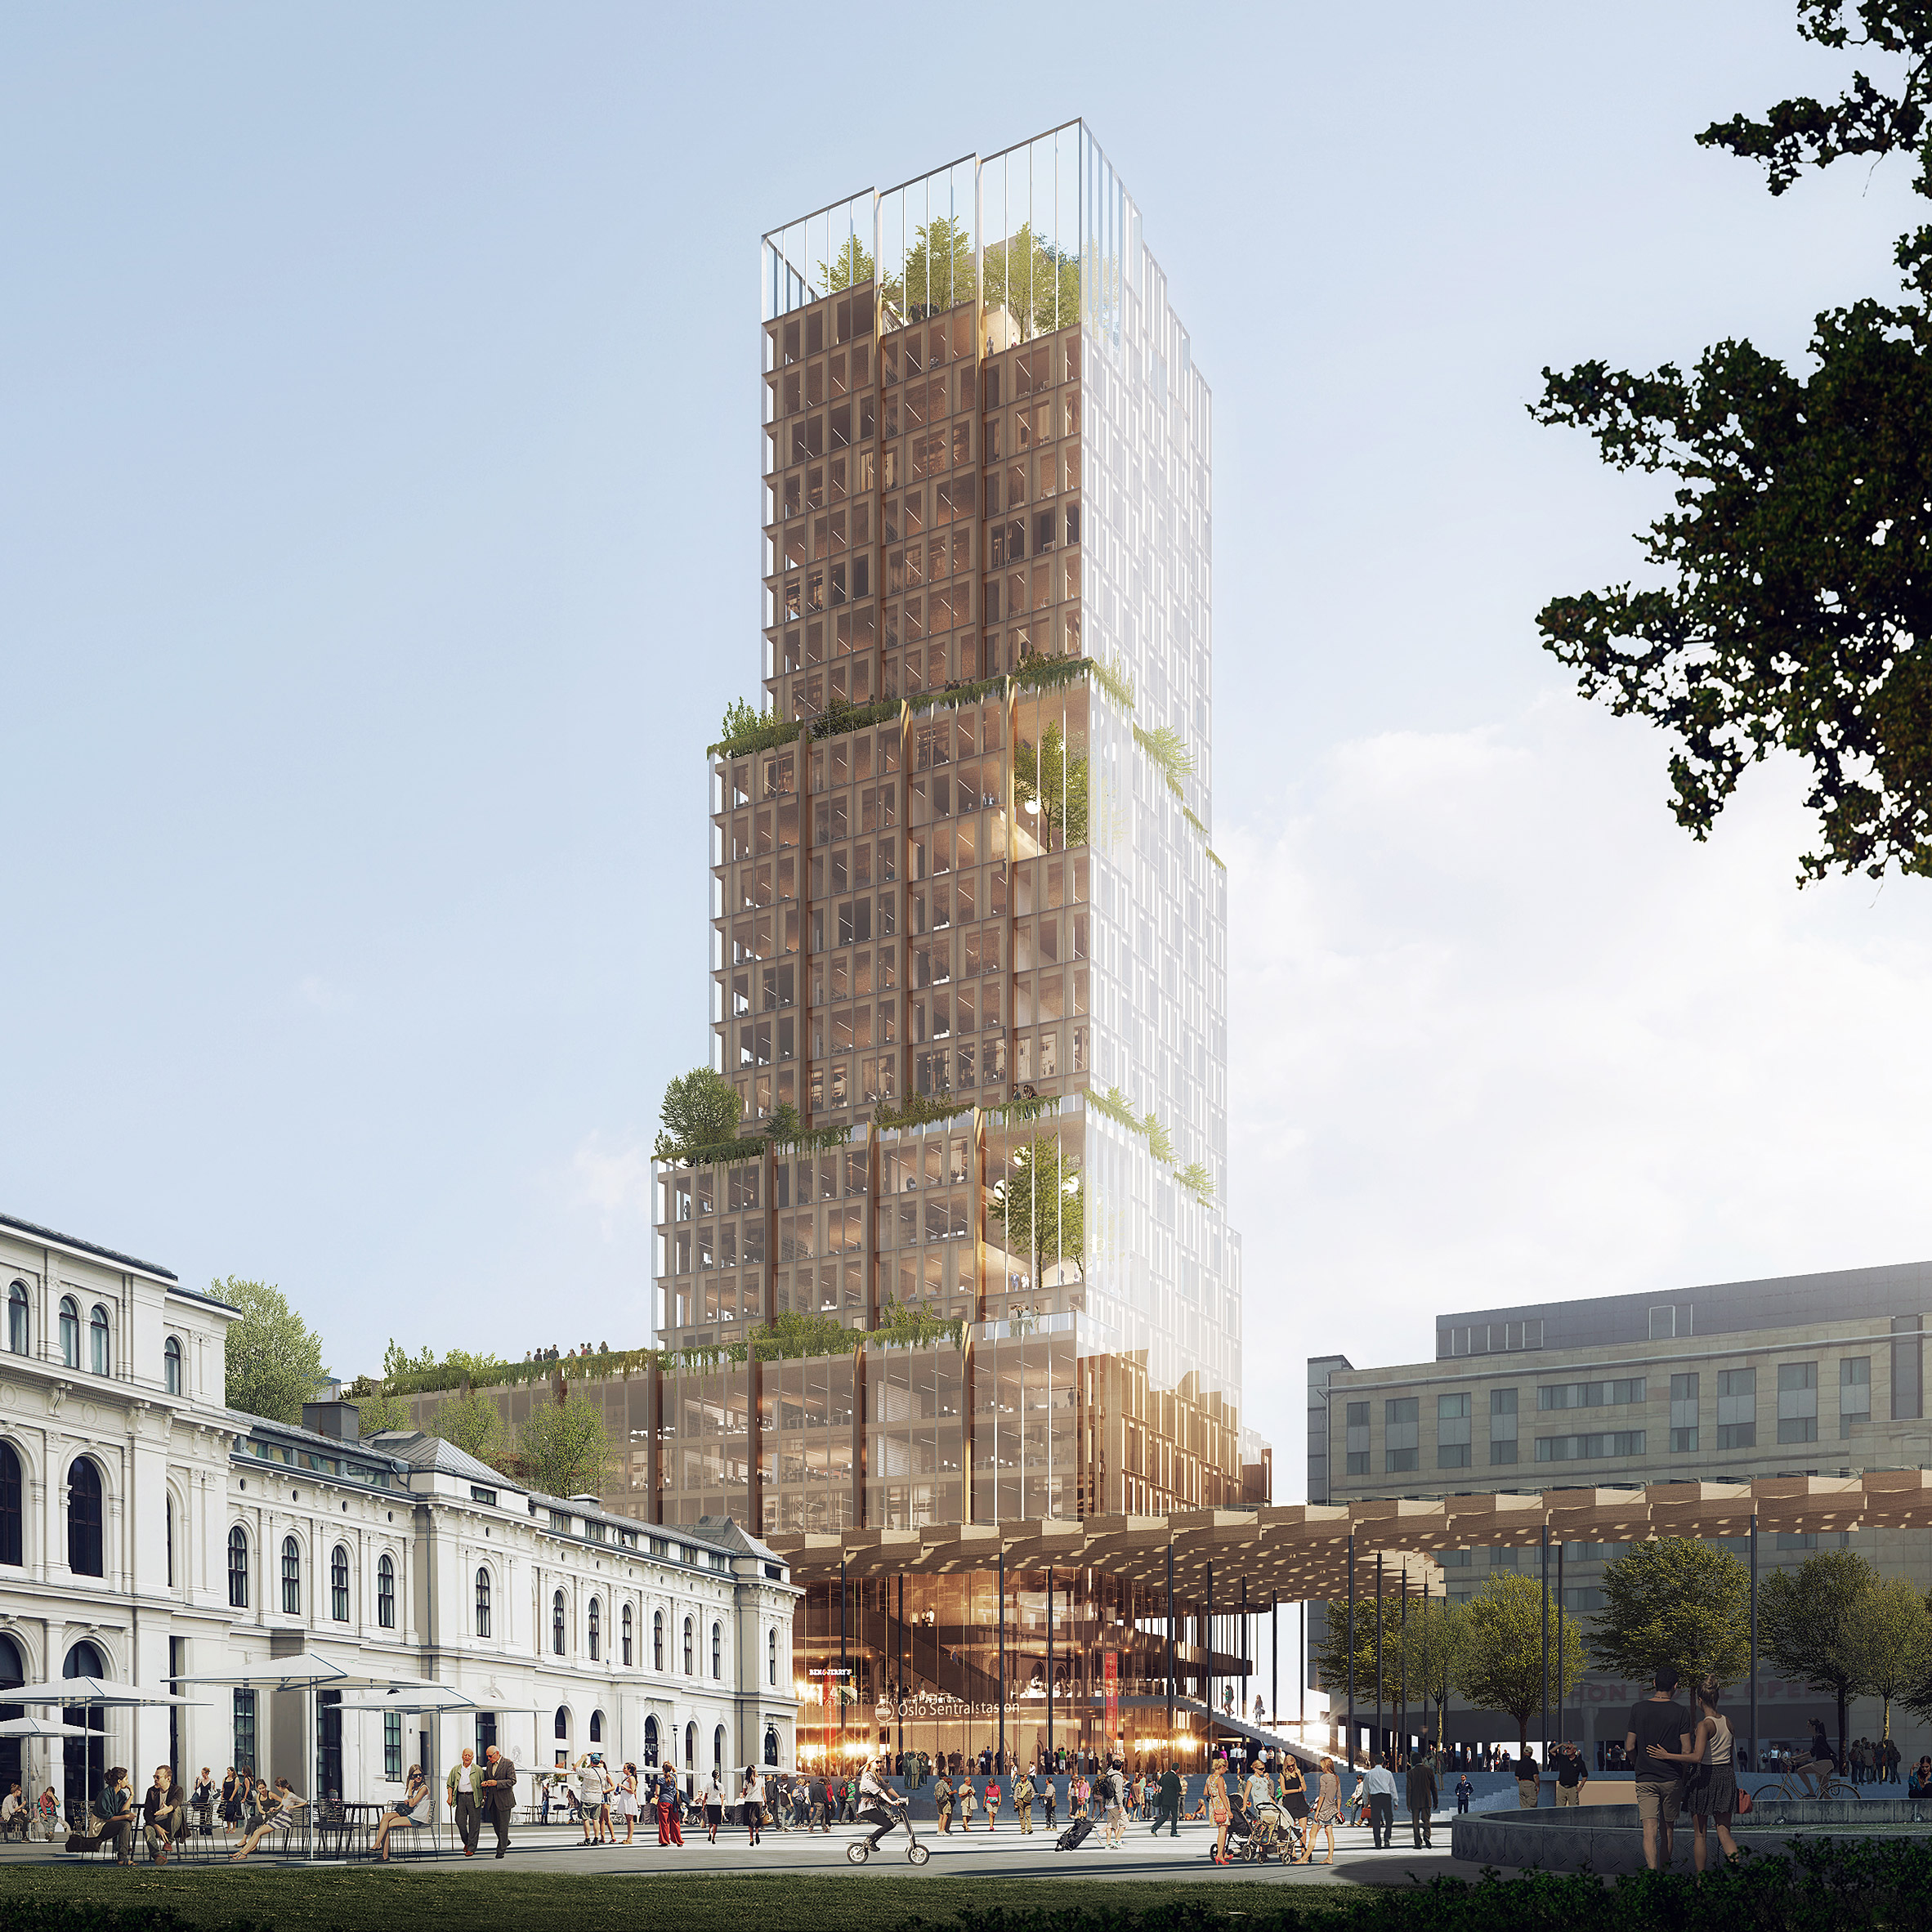 CF Møller and Reiulf Ramstad unveil plant-covered tower for Oslo